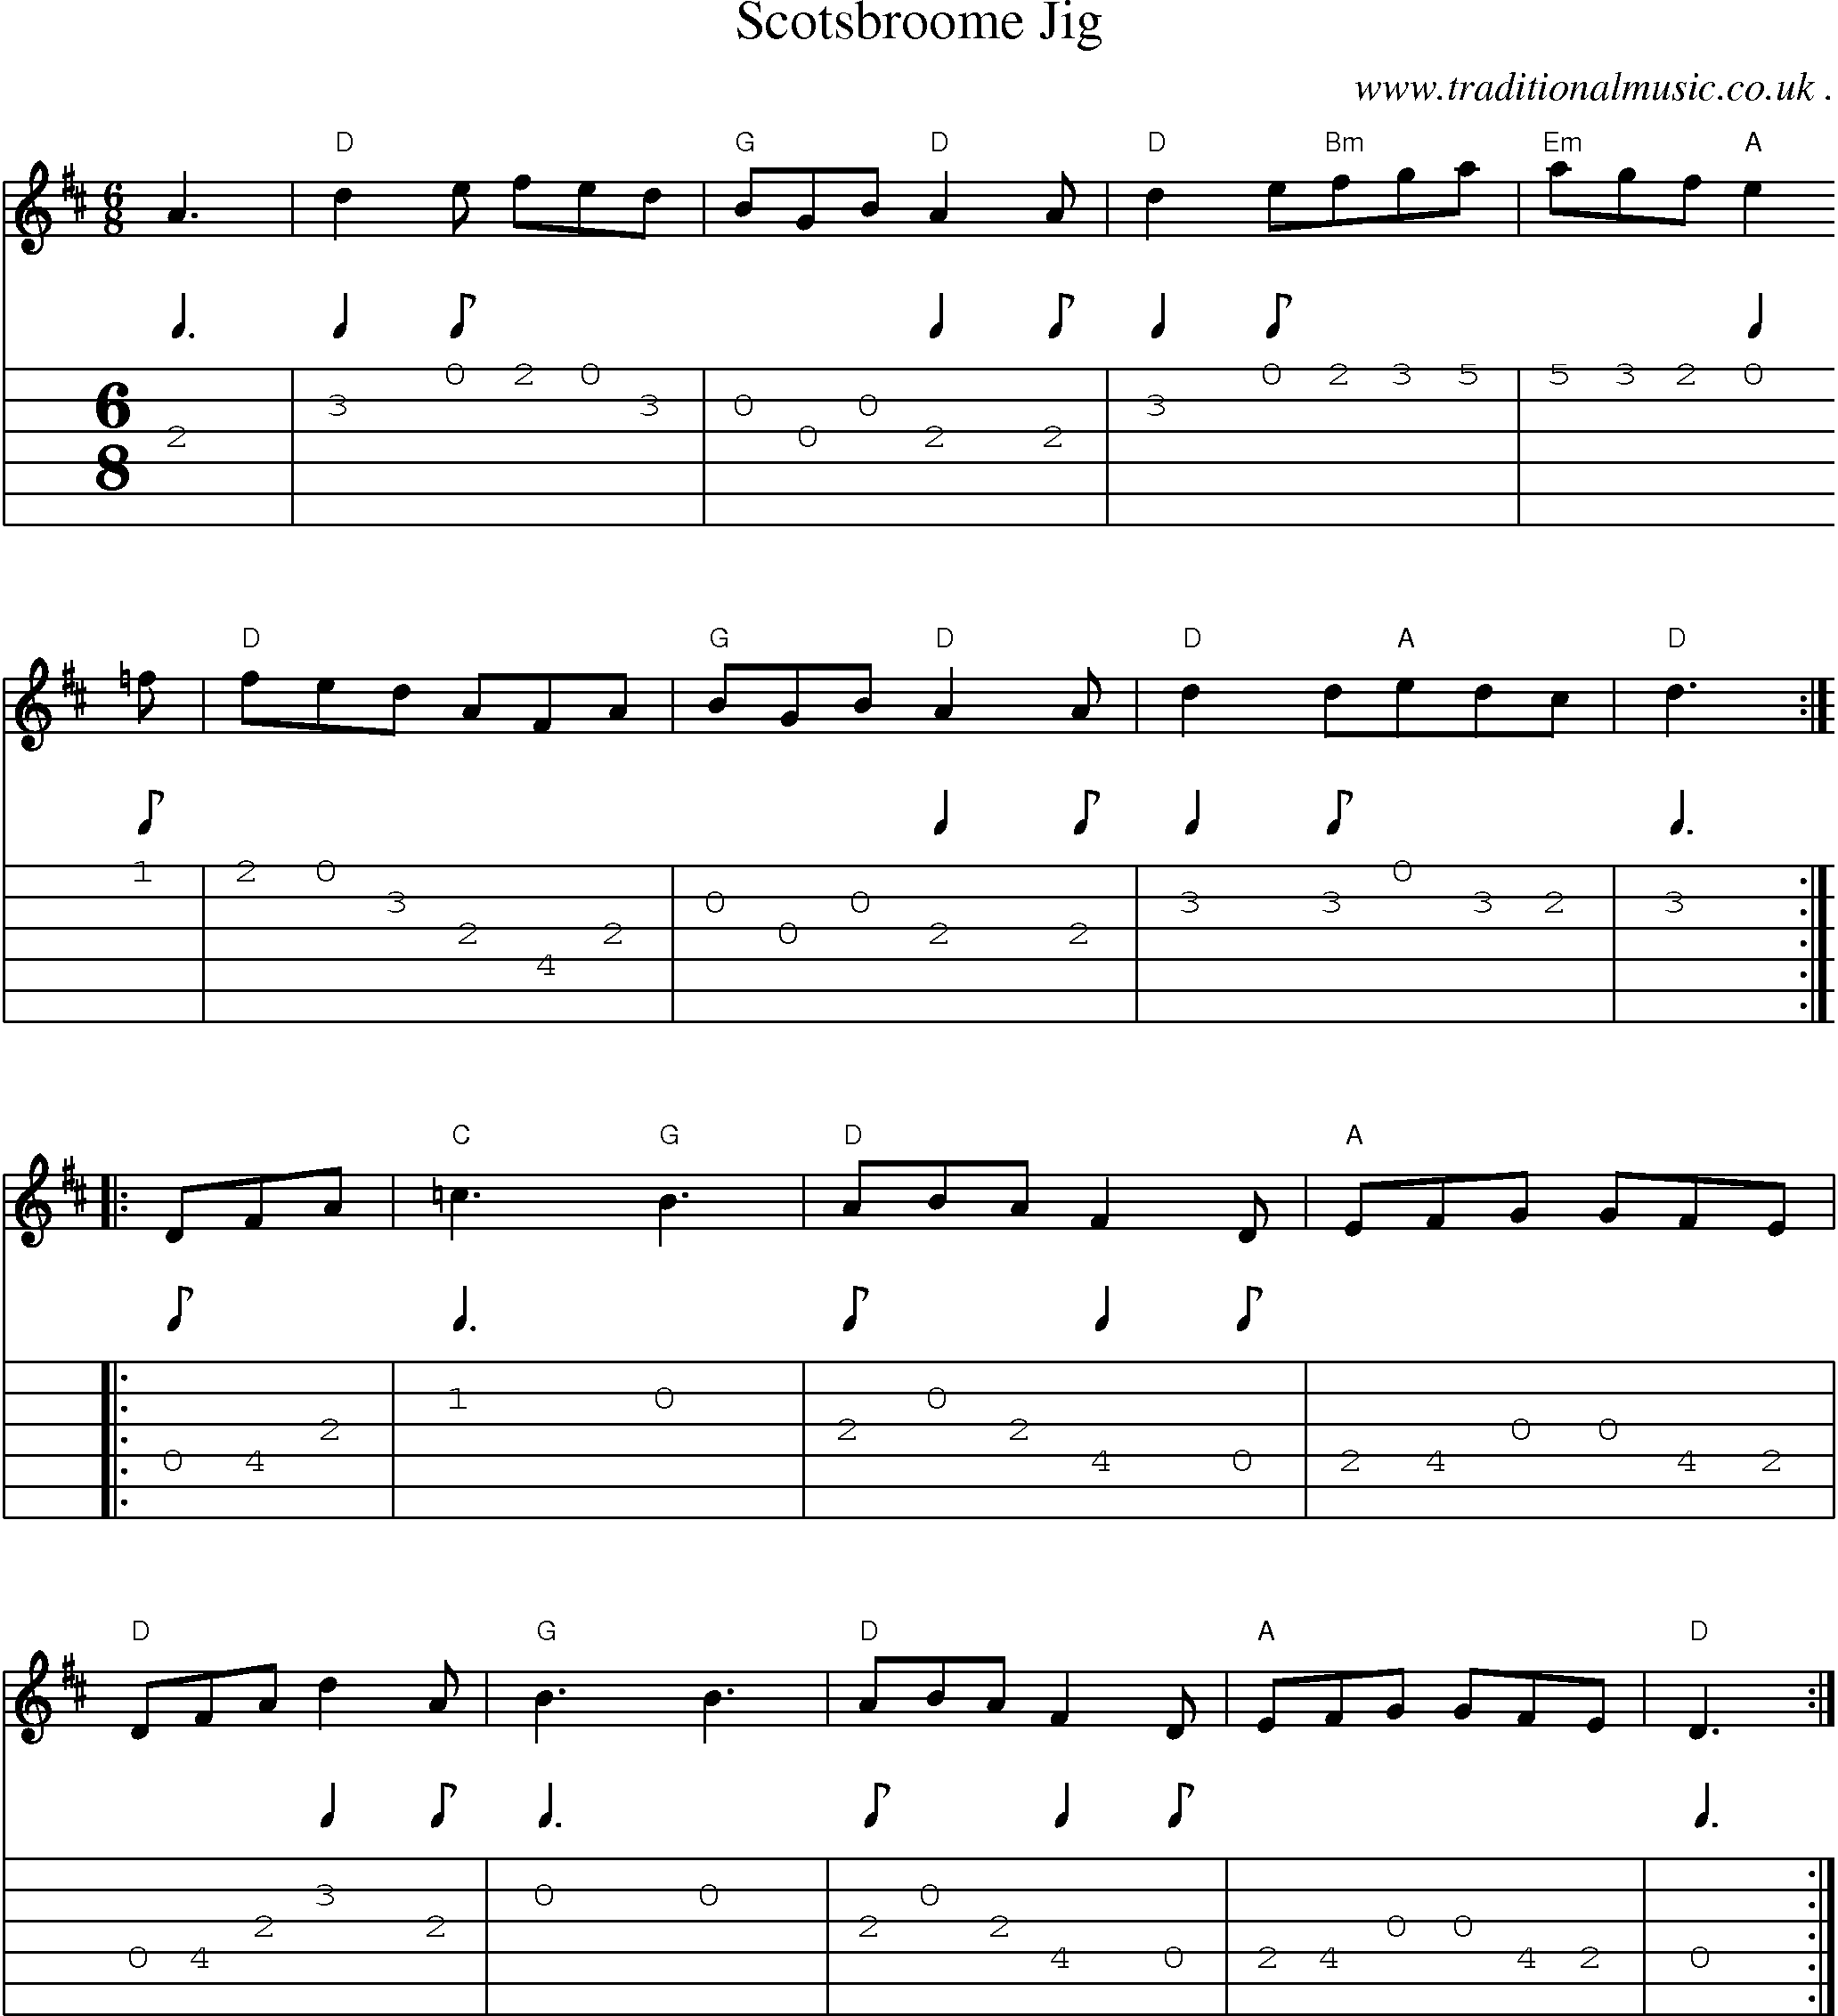 Sheet-Music and Guitar Tabs for Scotsbroome Jig